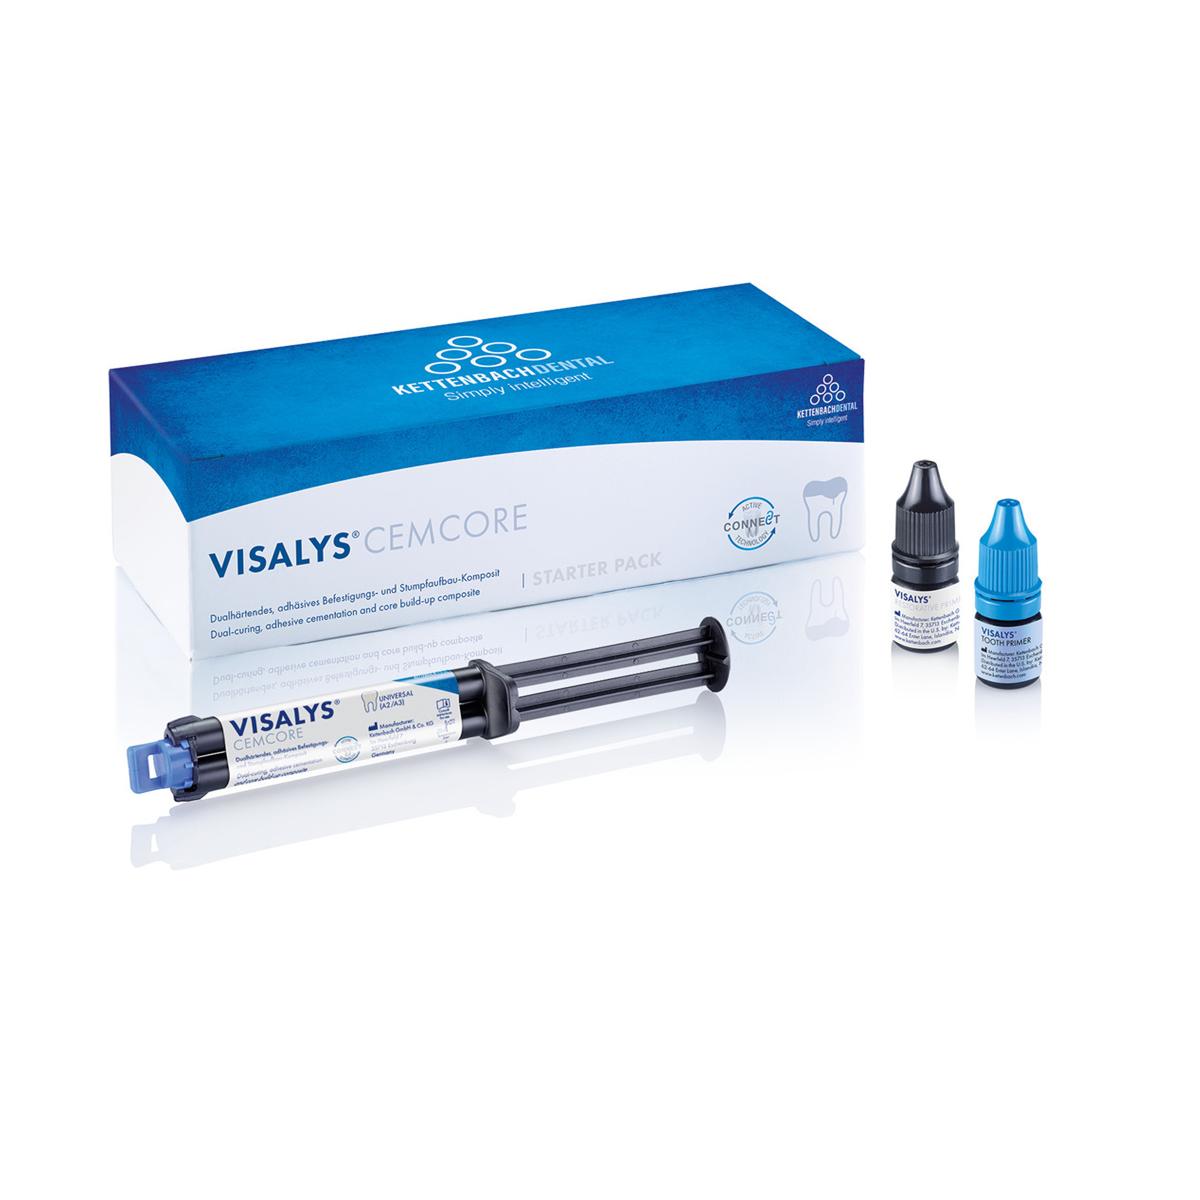 2 in 1 - Visalys CemCore - Starter Pack UNIVERSAL (A2/A3)